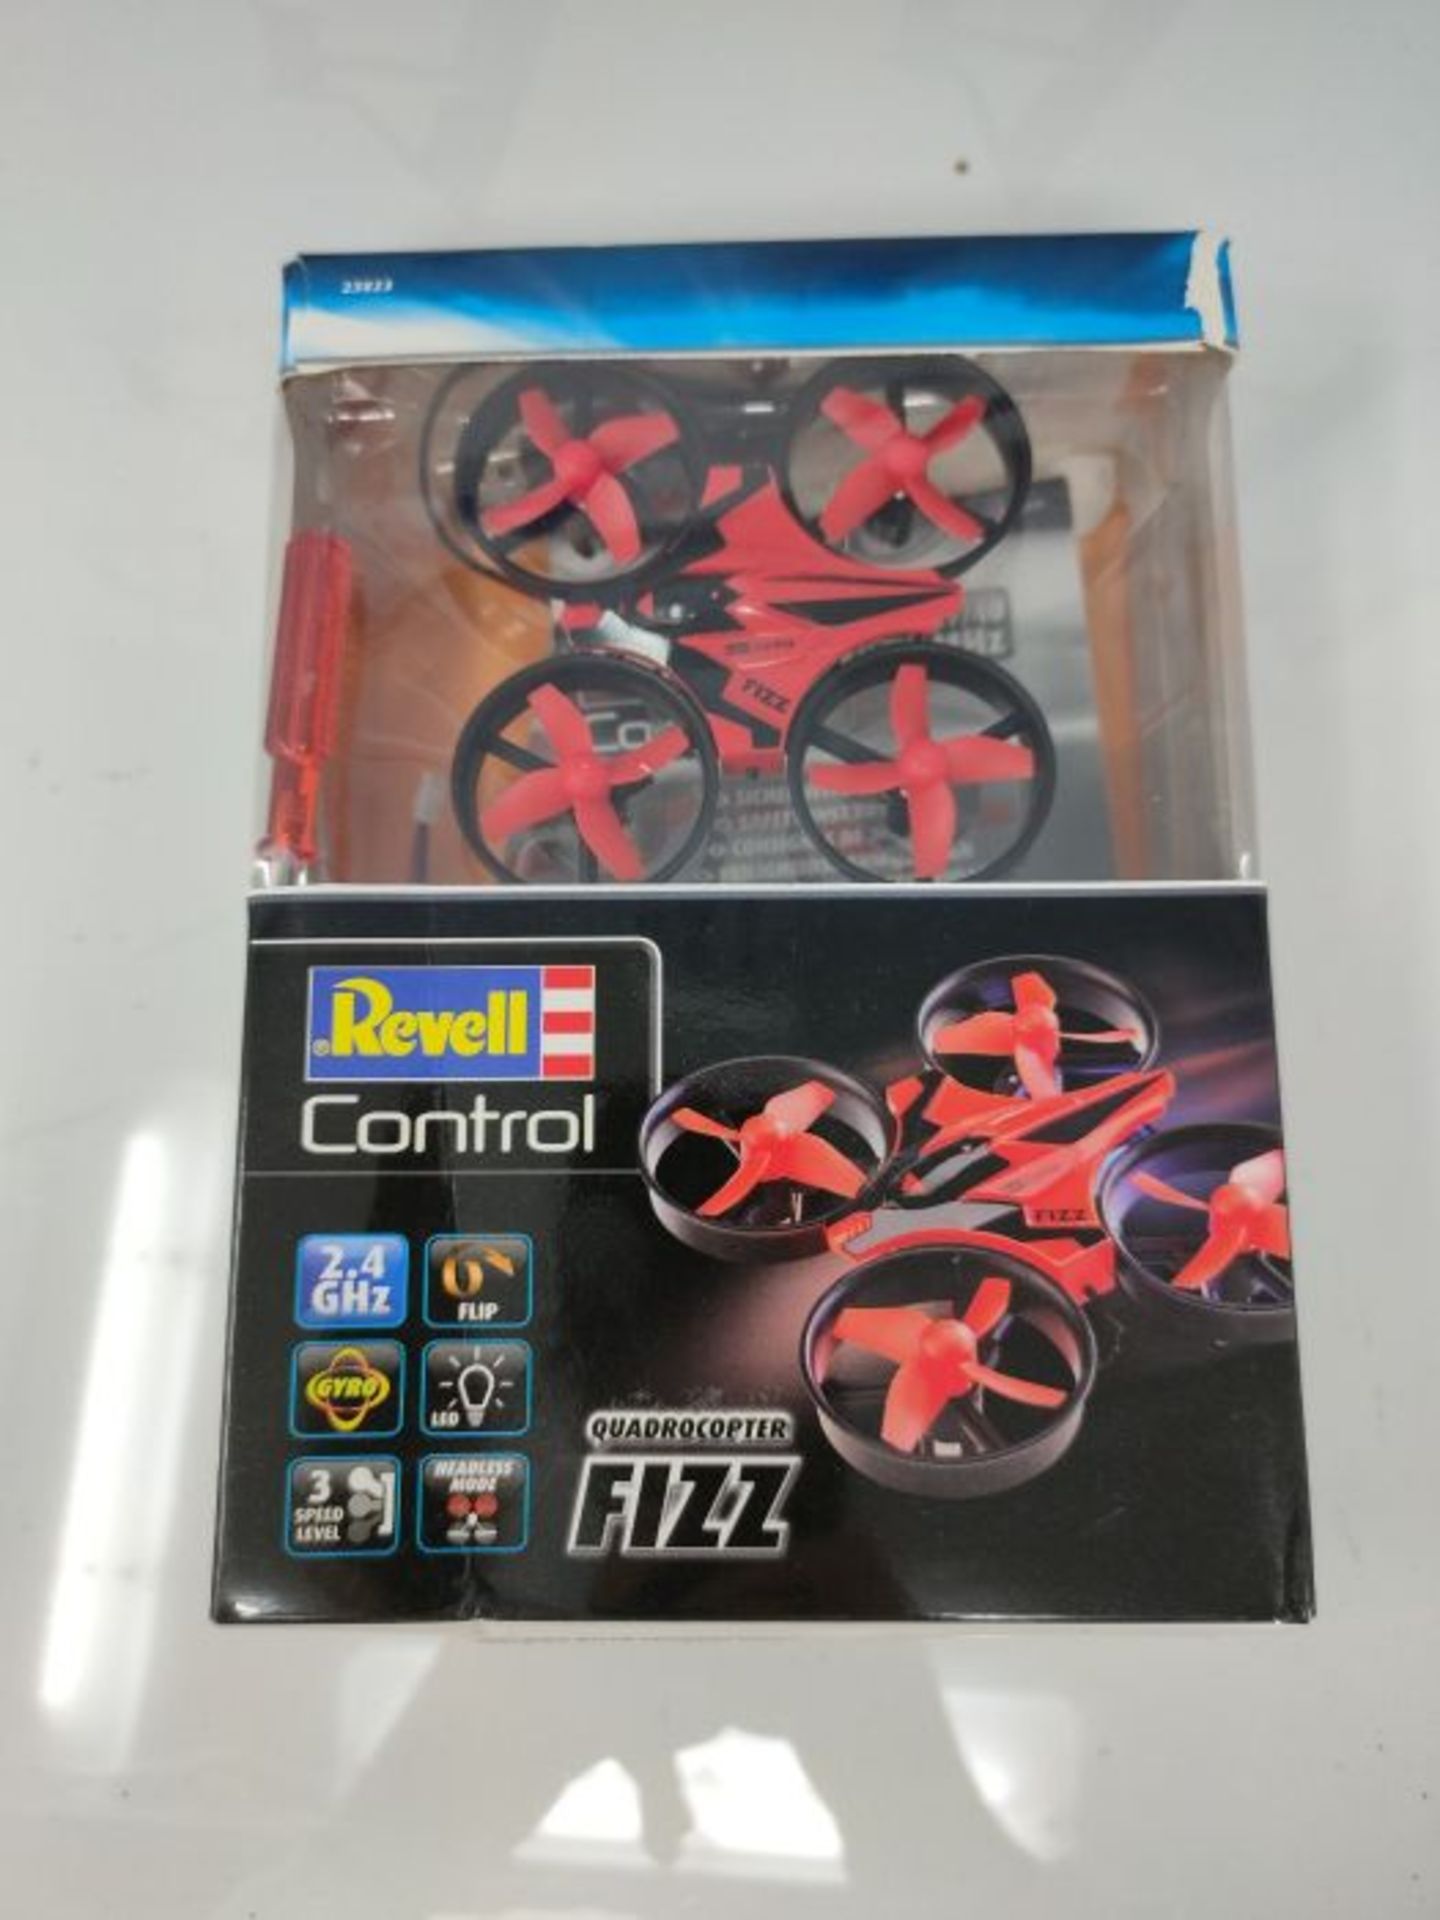 Revell Control 23823 Fizz RC Quadcopter, Red - Image 2 of 3